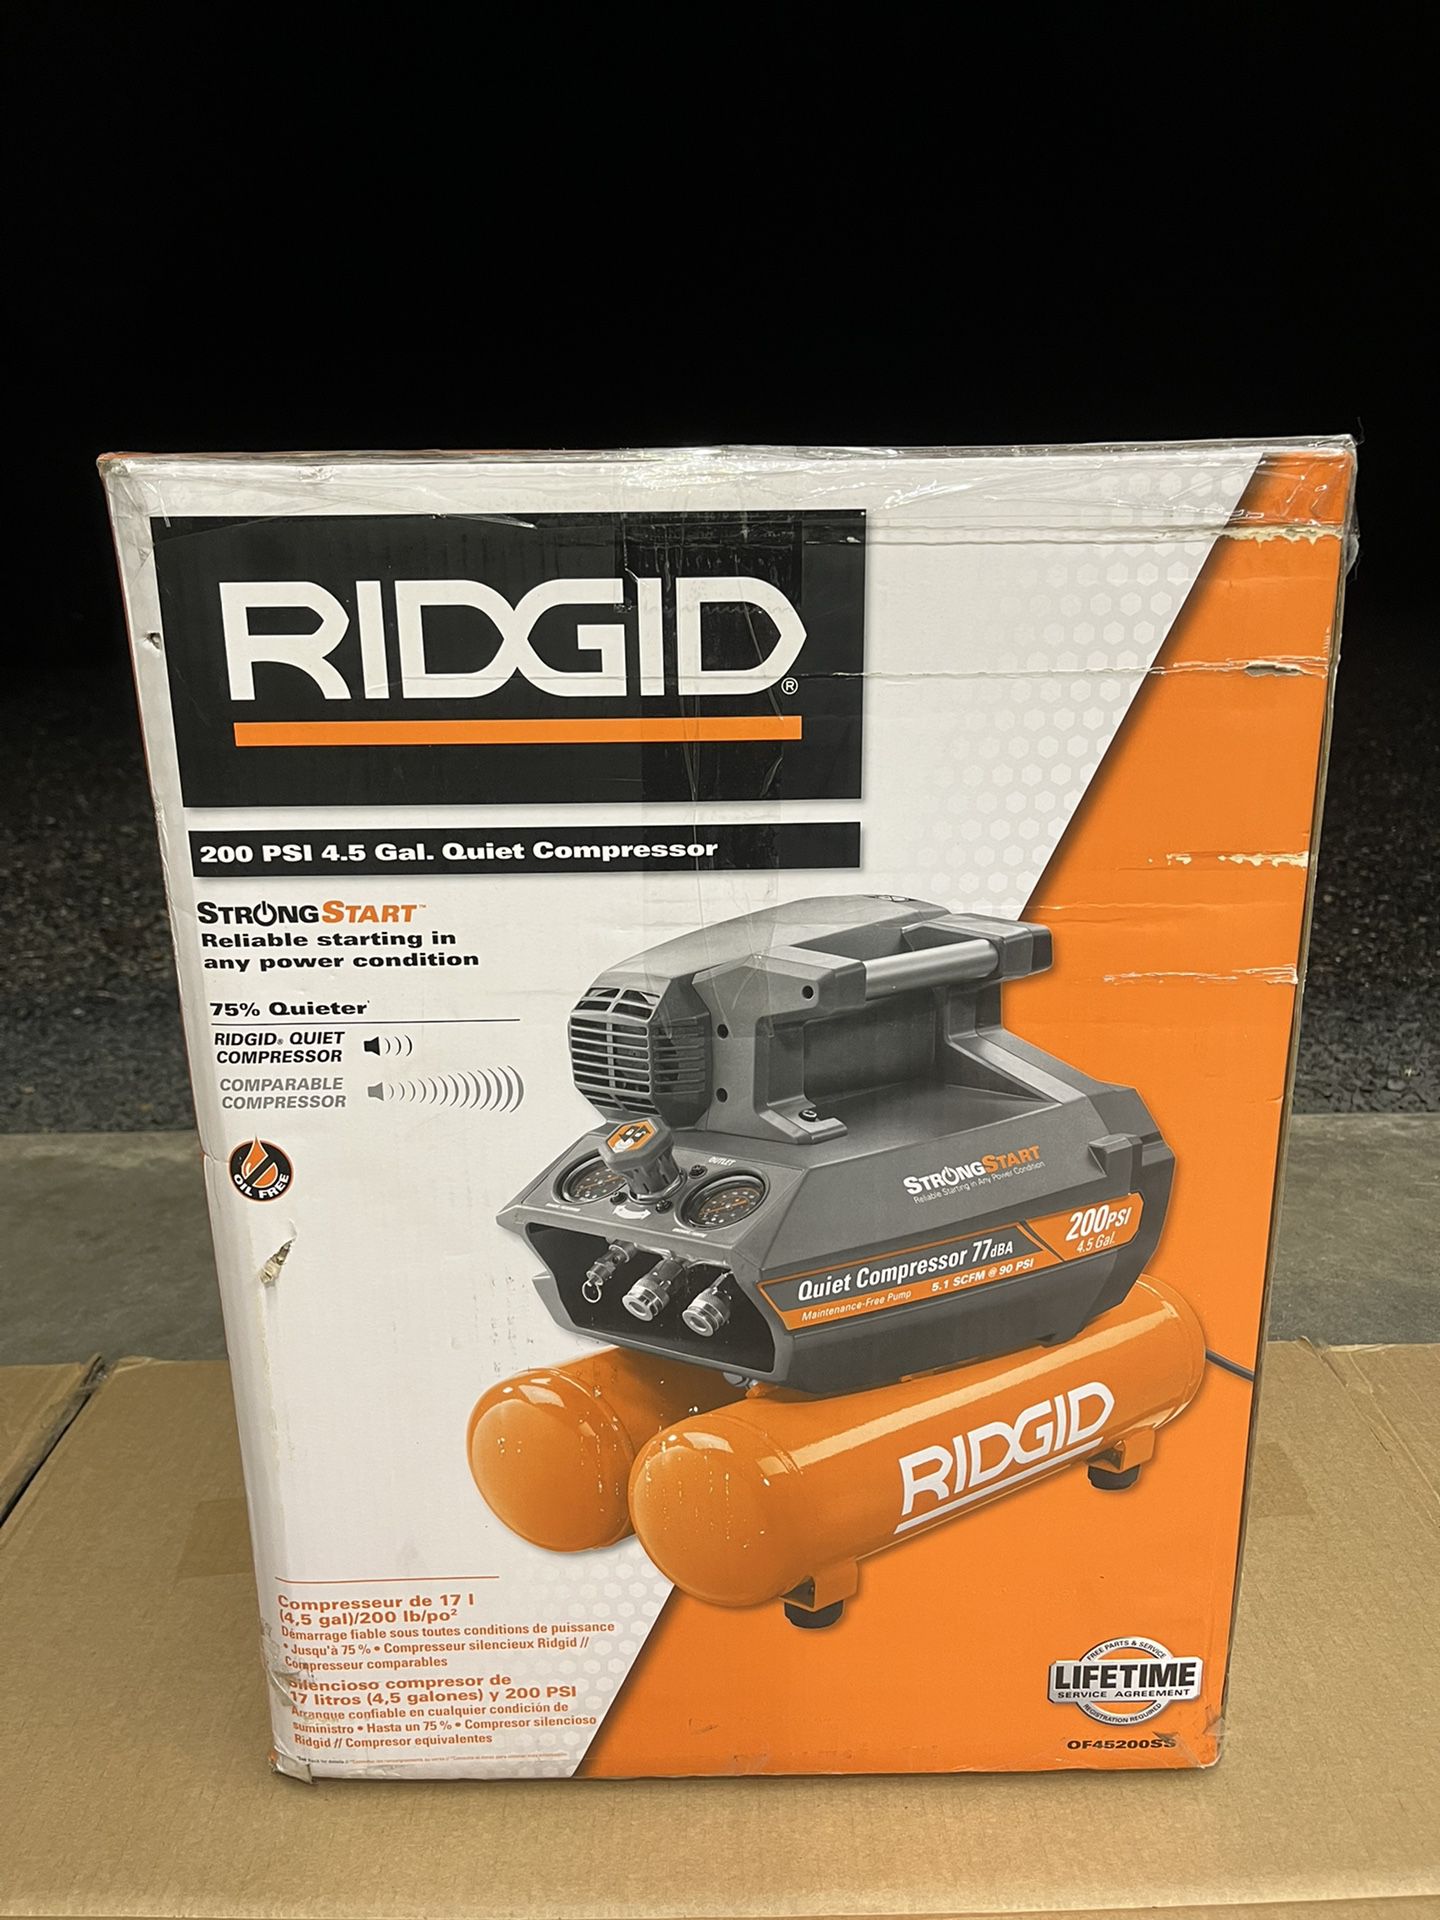 RIDGID 4.5 Gal. Portable Electric Quiet Air Compressor 200 PSI: Provides the ideal pressure for the toughest applications 5.1 SCFM at 90 PSI: High-air